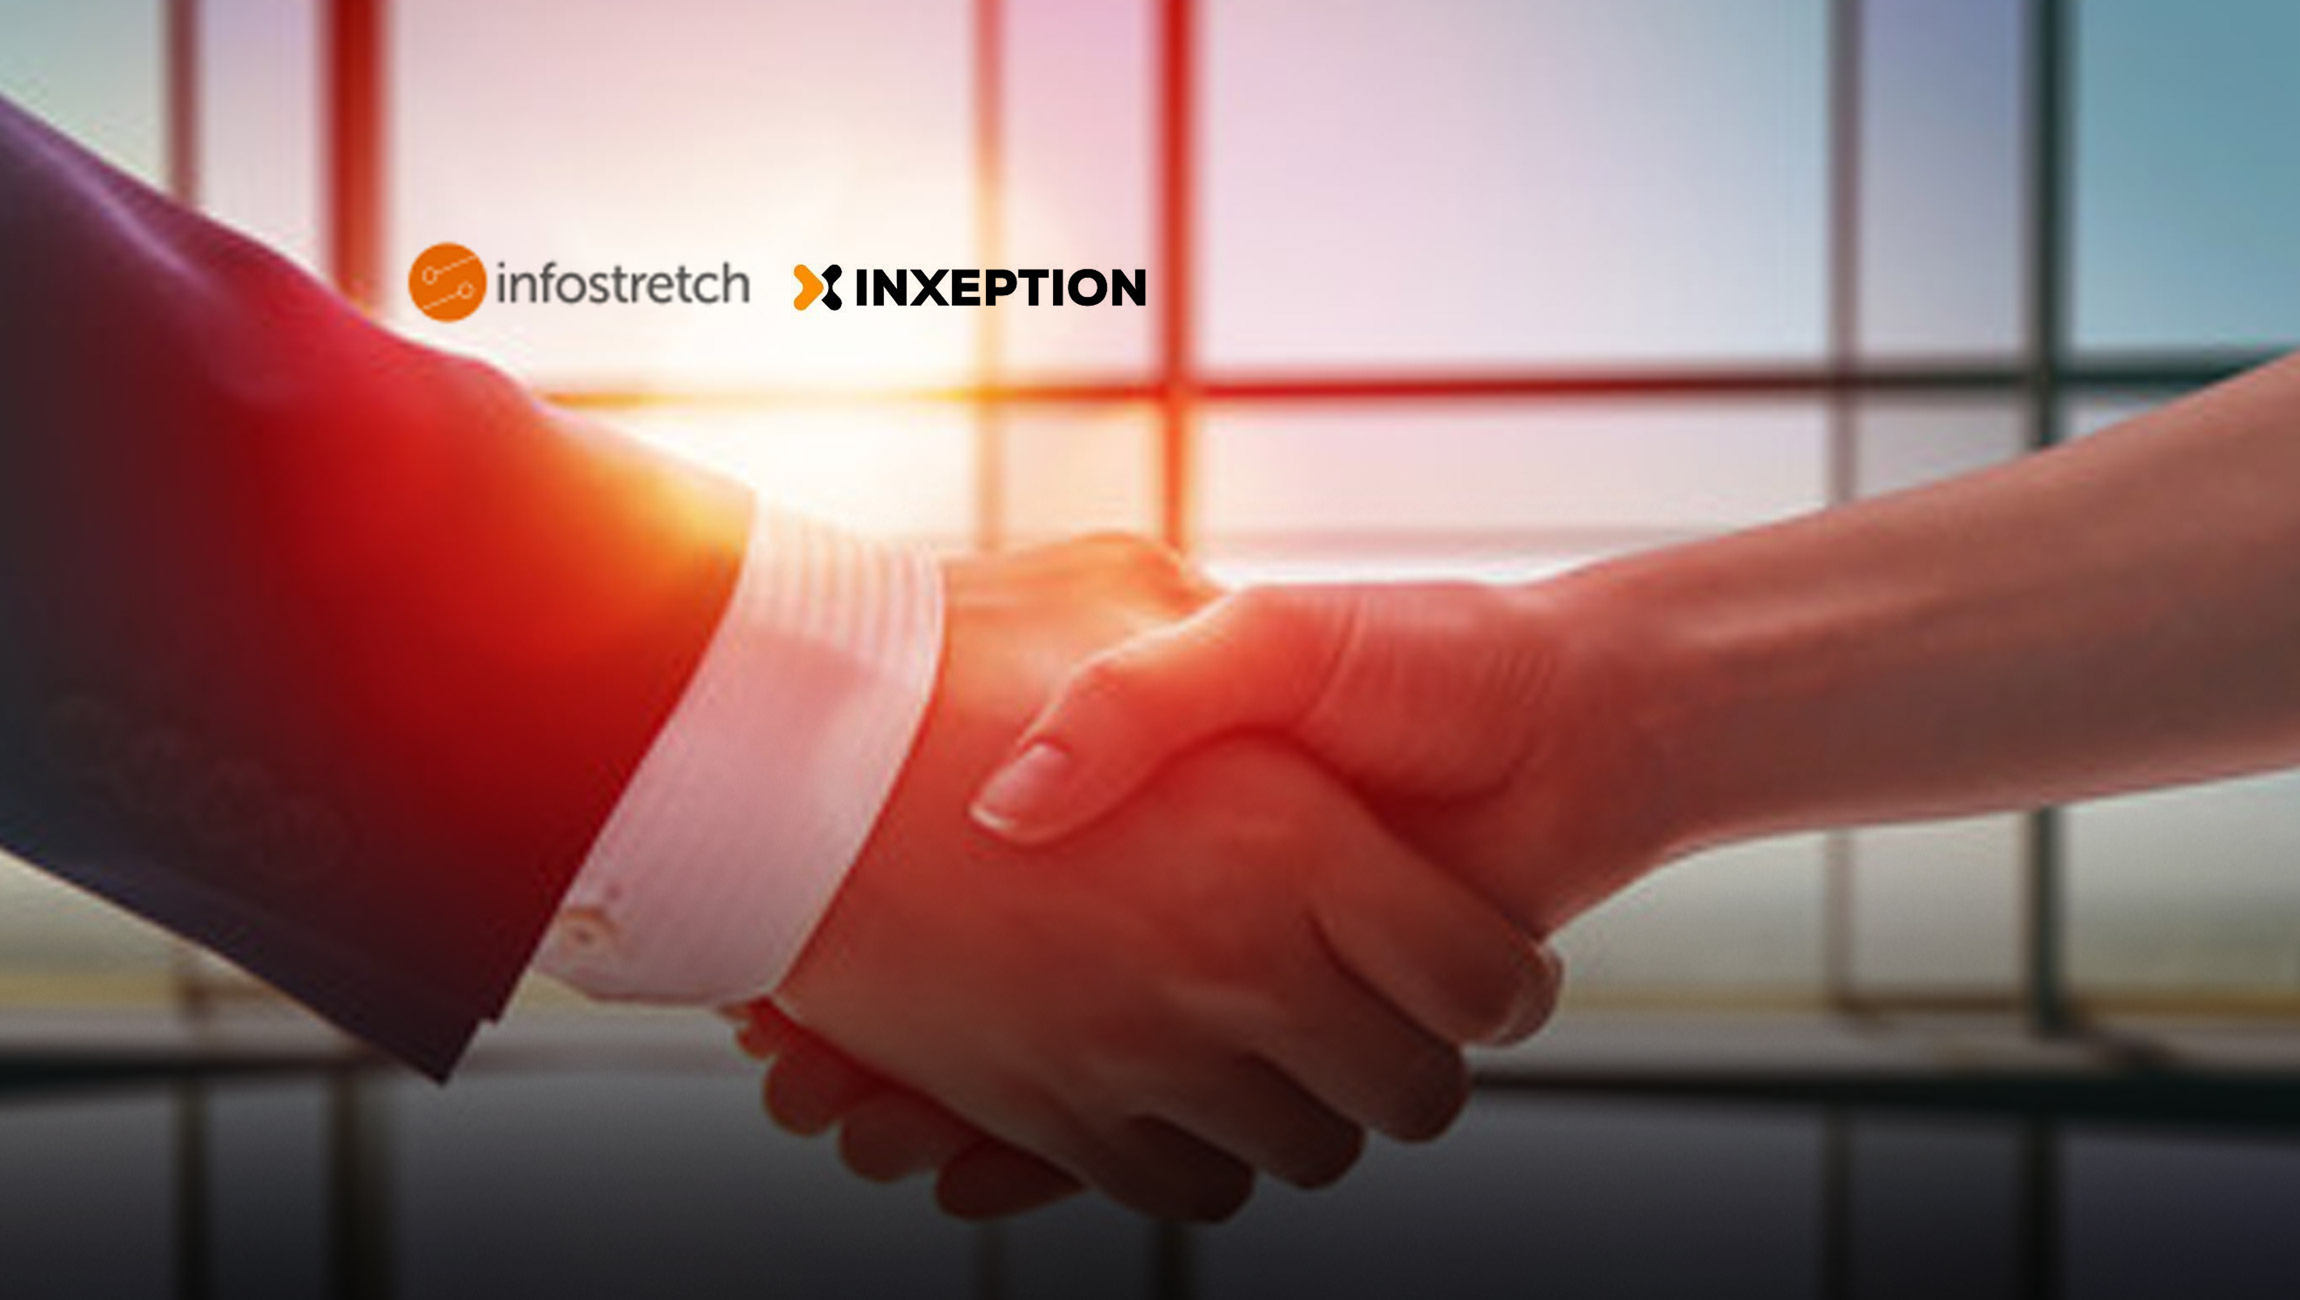 Infostretch Announces Data Insights Engagement With Inxeption